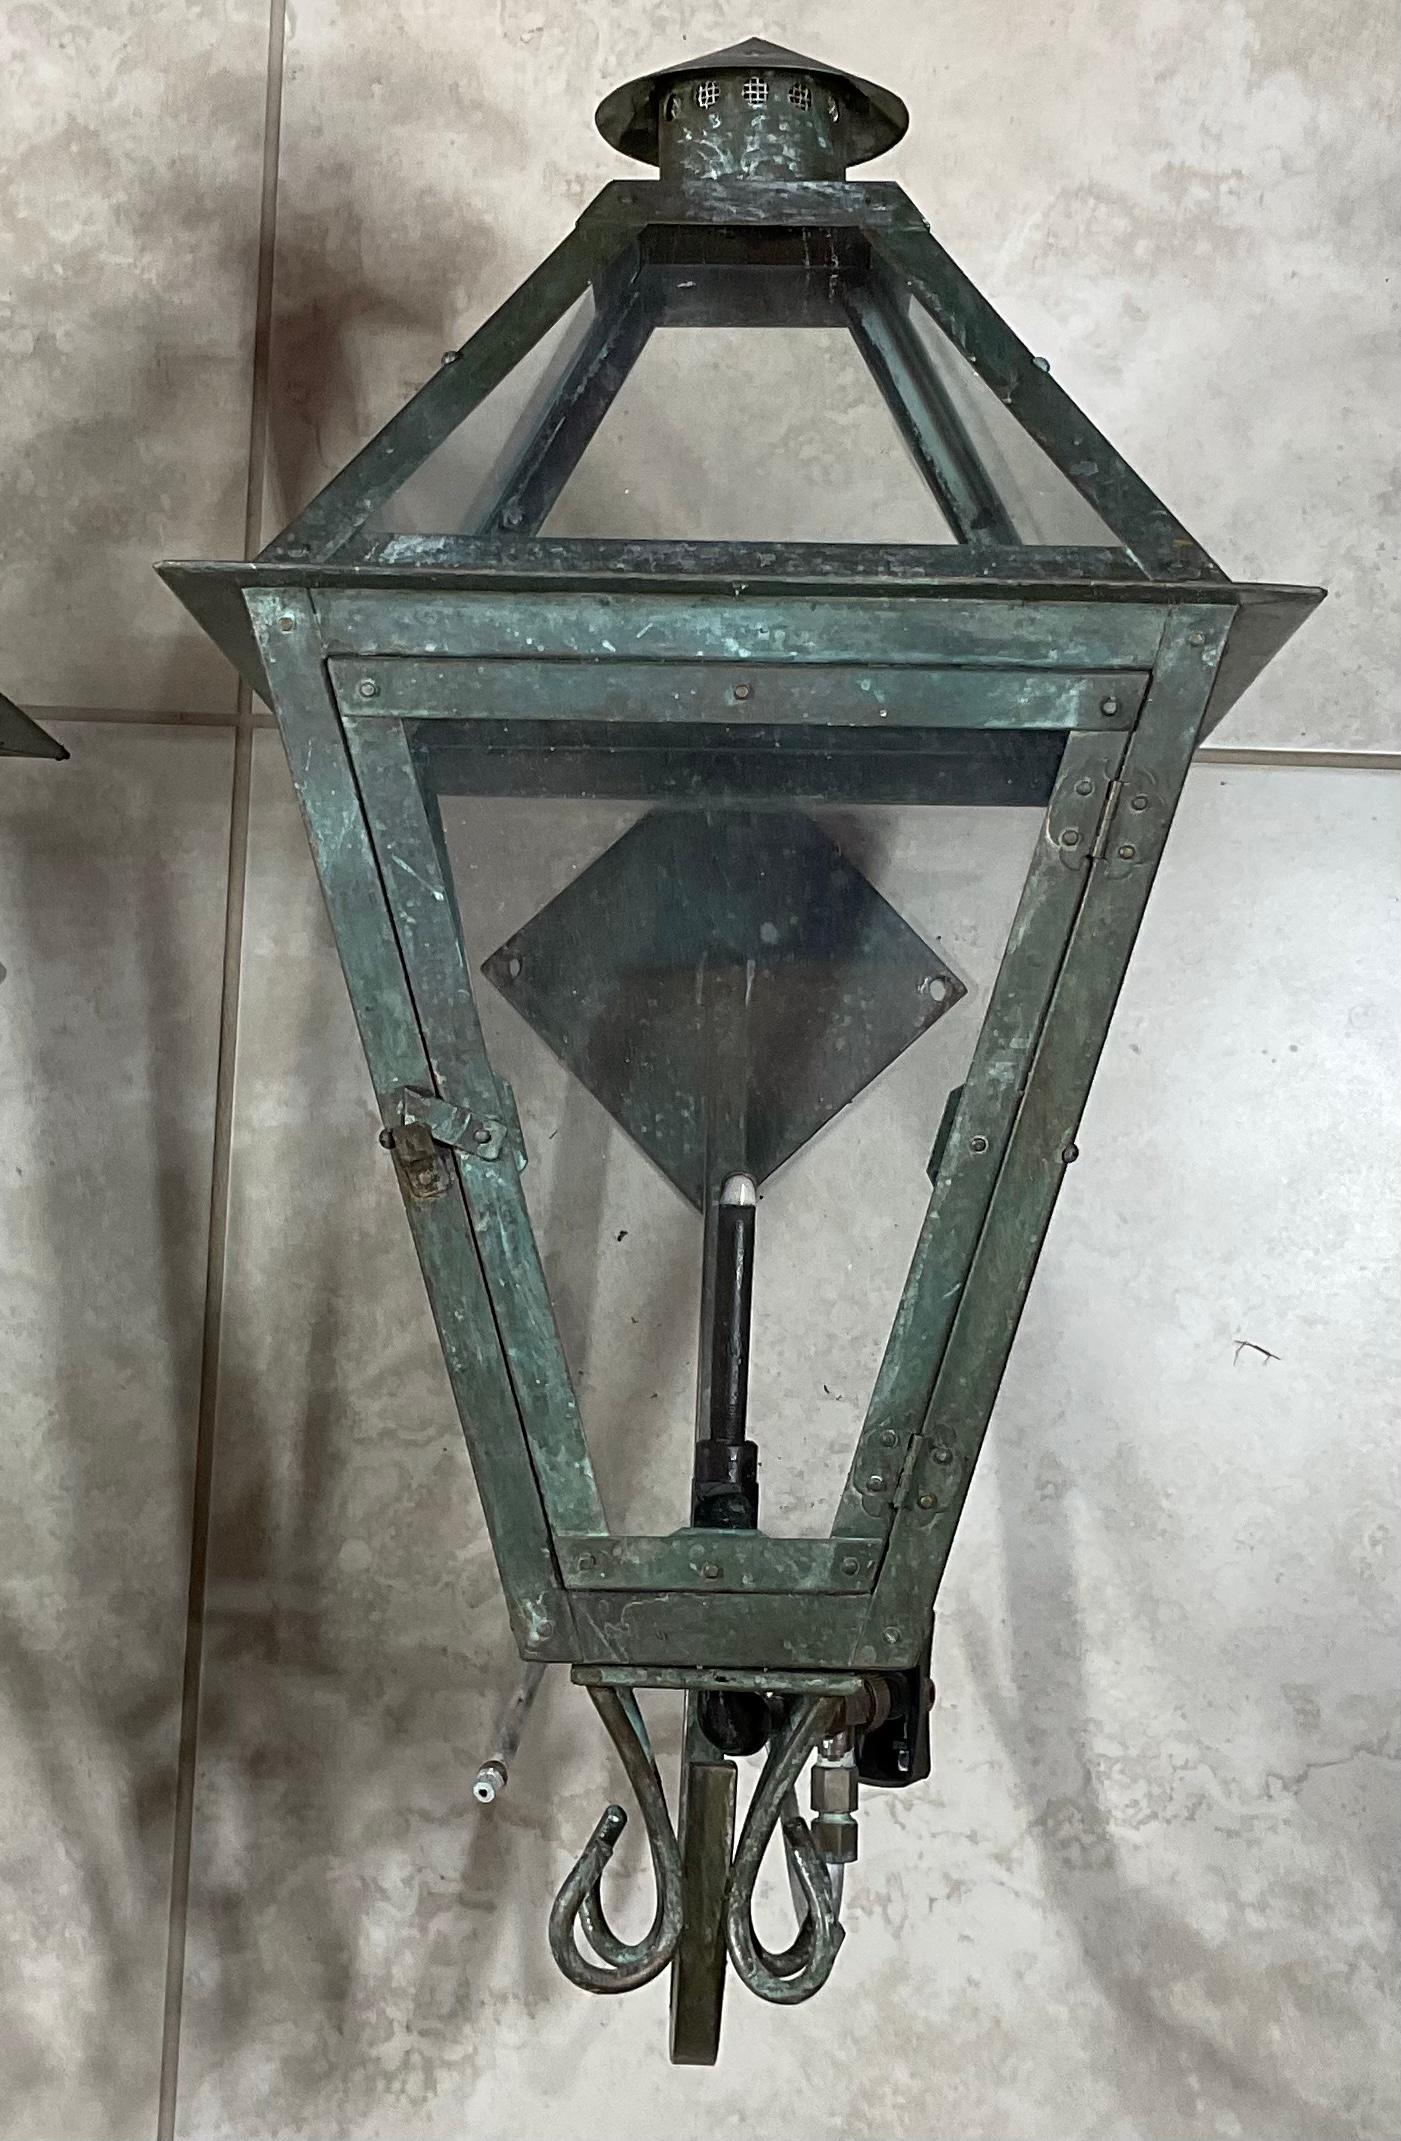 American Pair of Gas Wall Hanging Copper Lantern